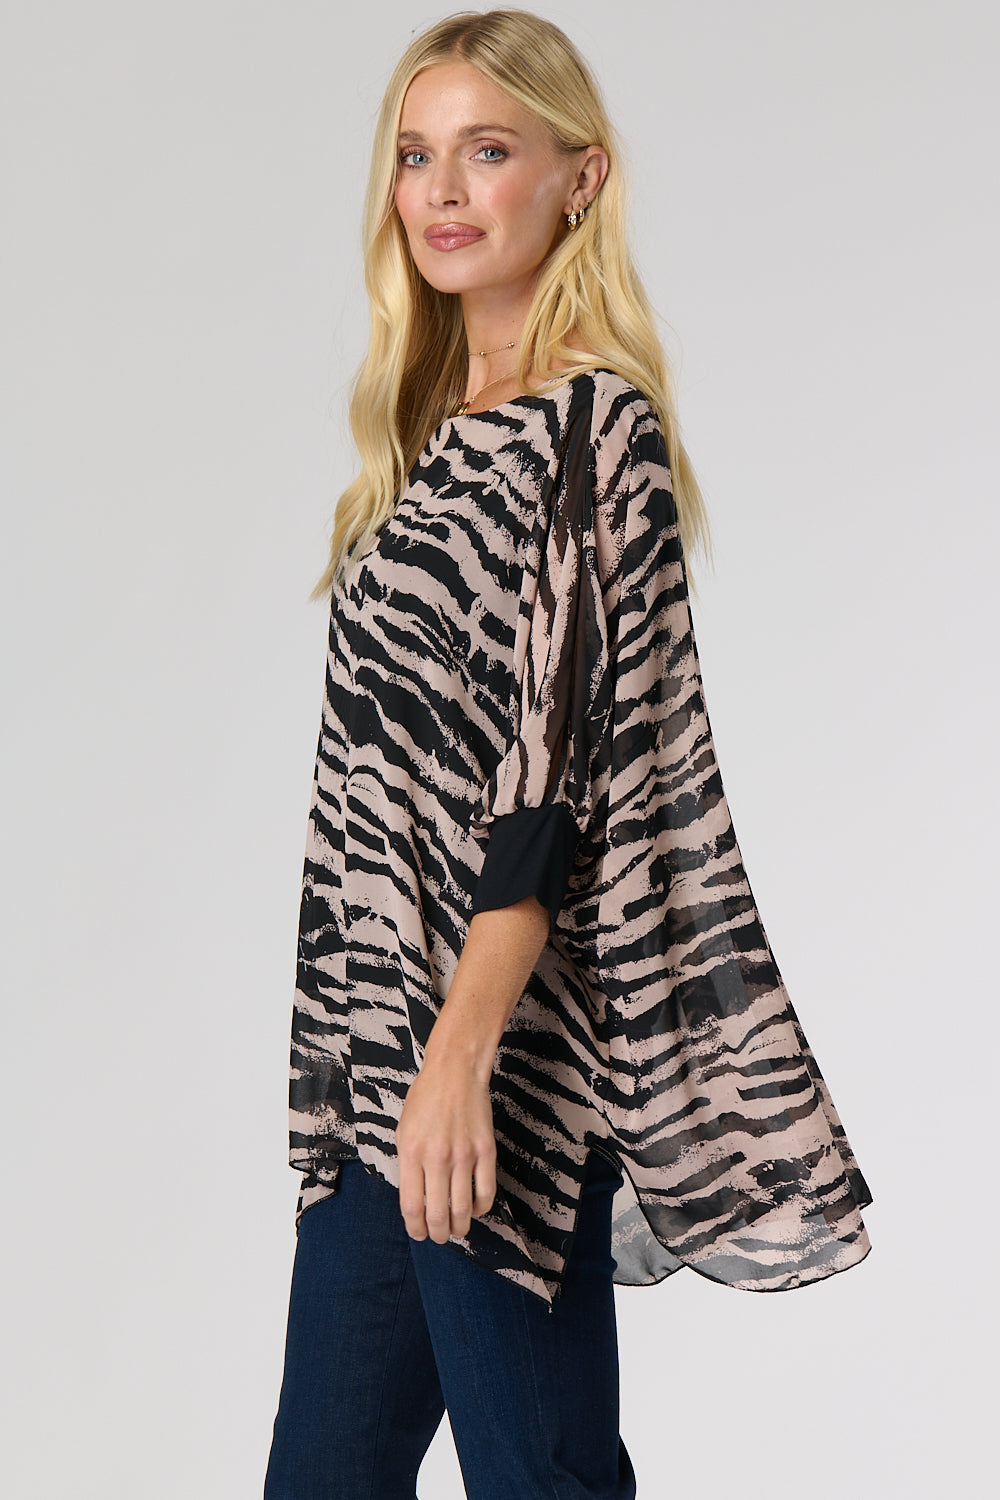 Saloos Elegant Double Layer Top with Contrasting Cuffs